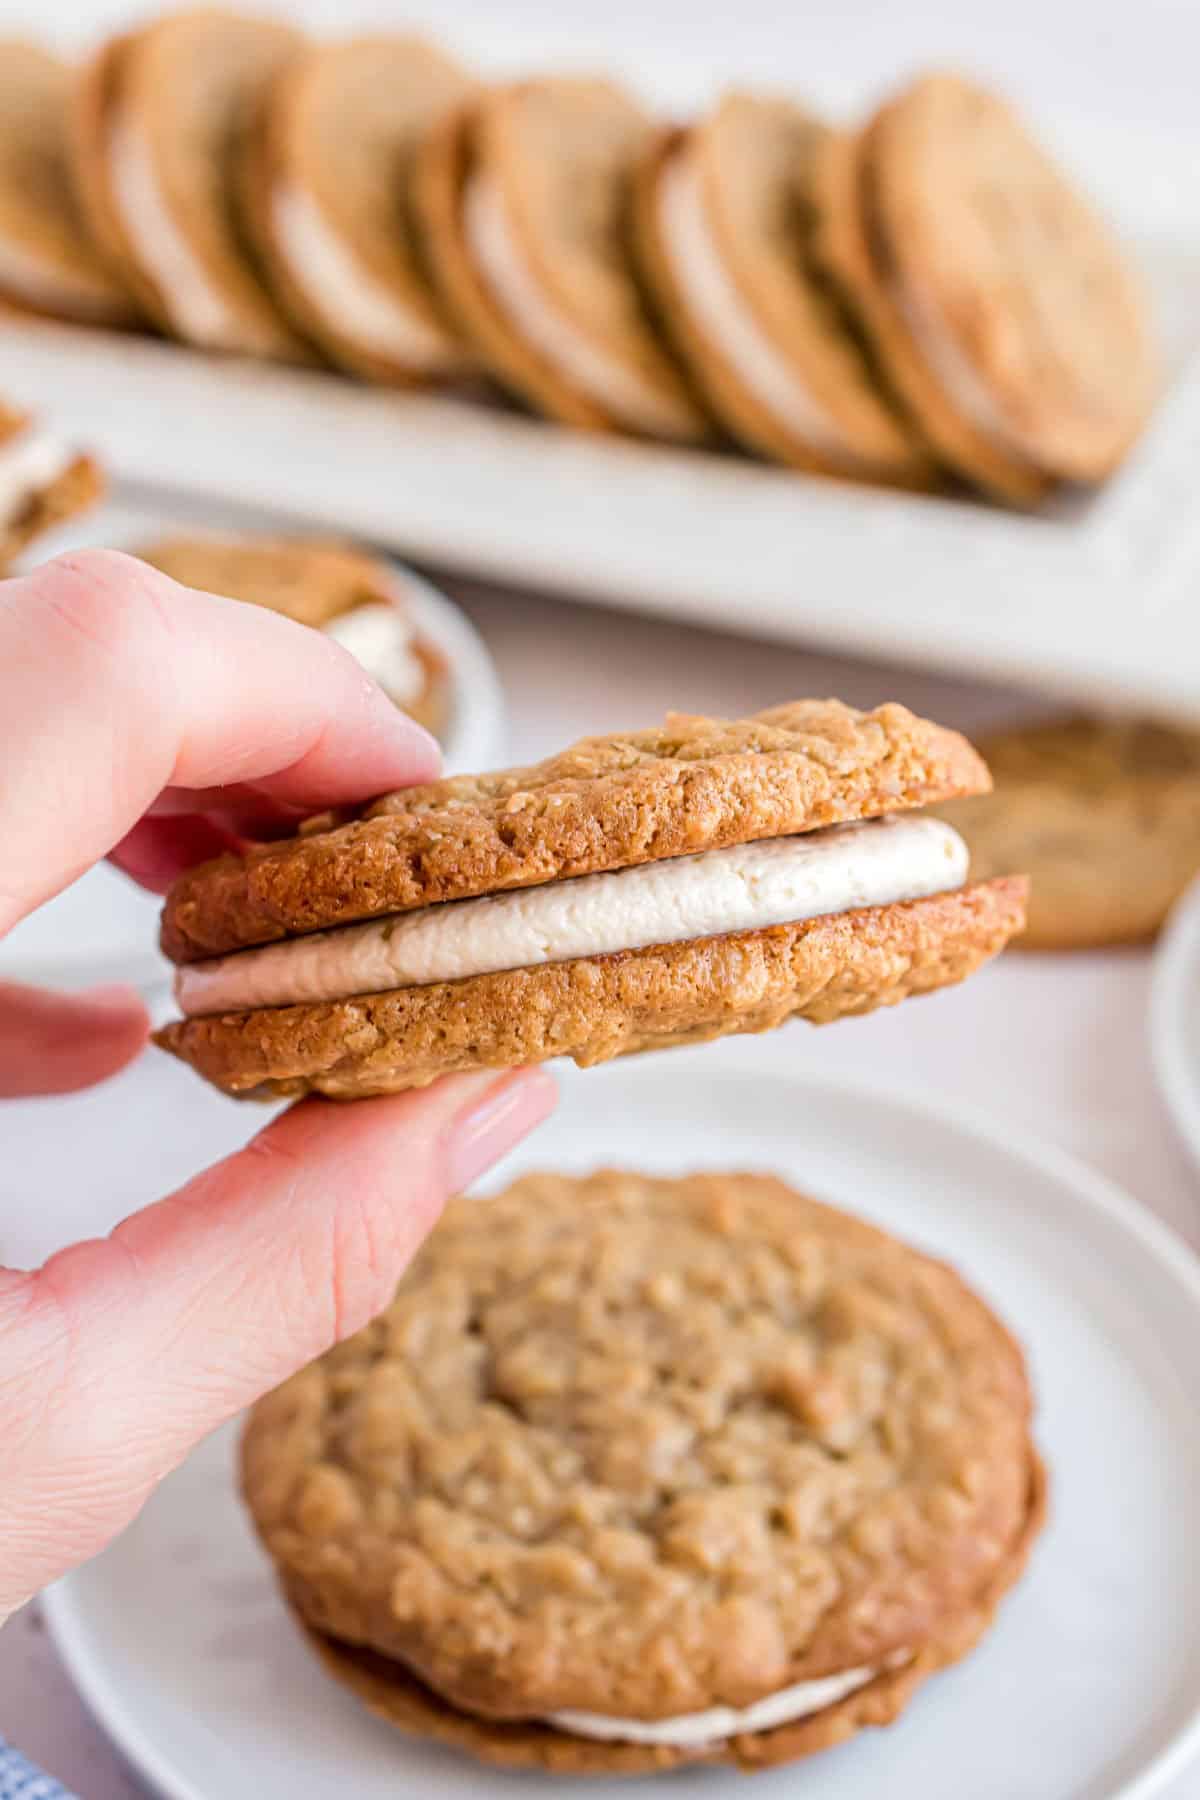 Oatmeal Cream pies being held up to take a bite.